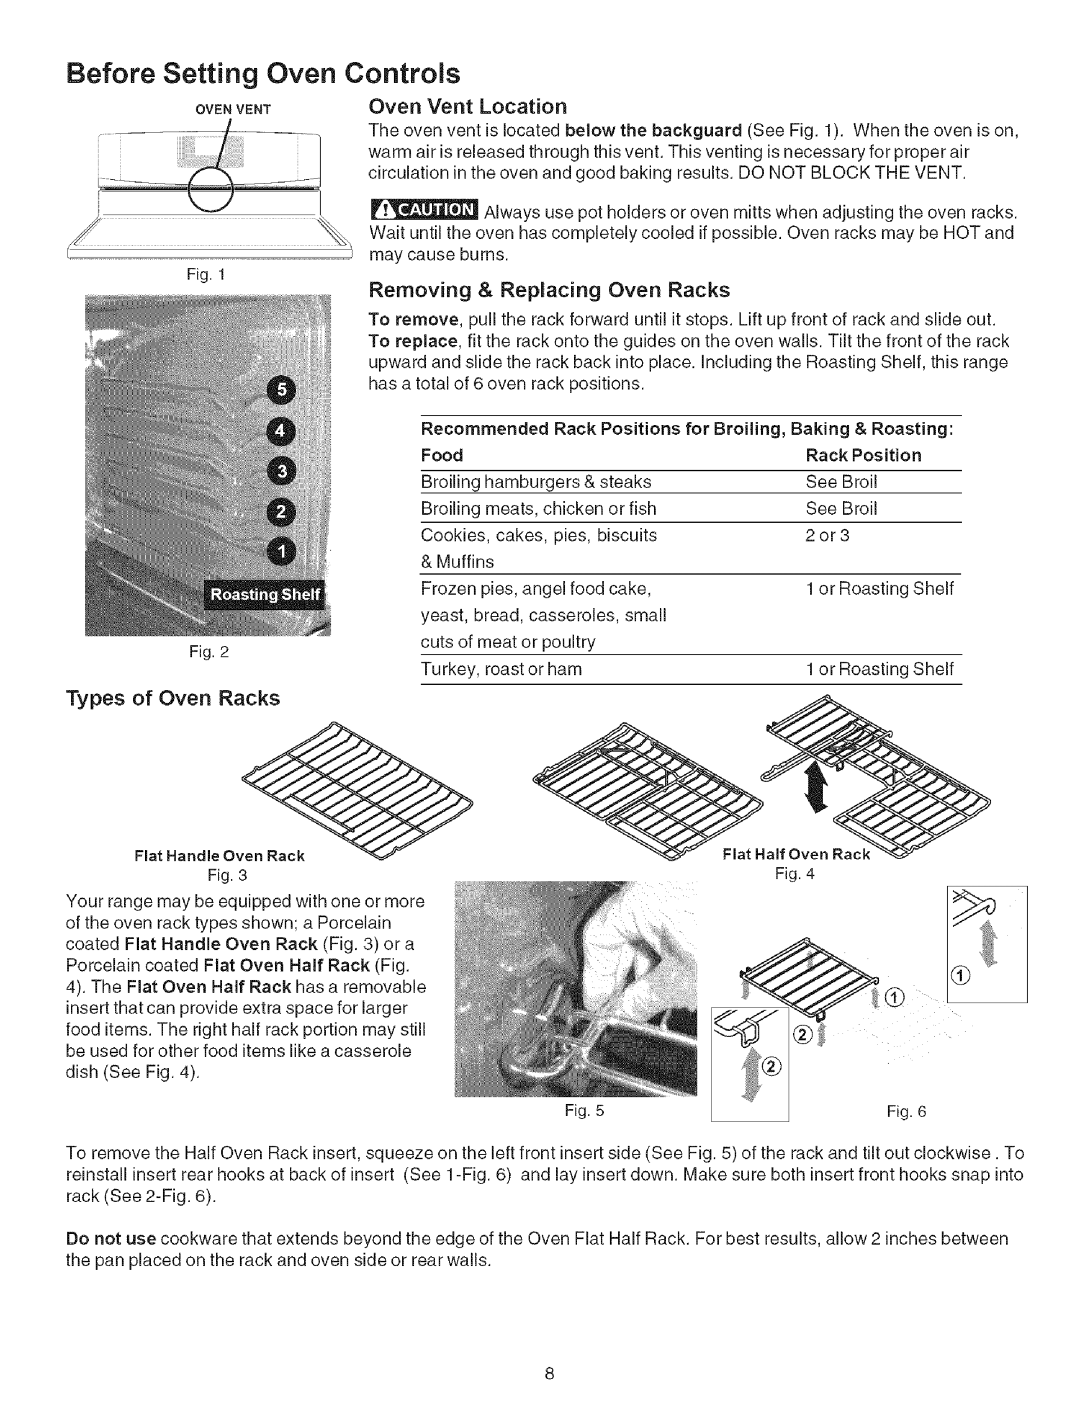 Kenmore 790.7946 manual Before Setting Oven Controls, Removing, Replacing, Types of Oven Racks 